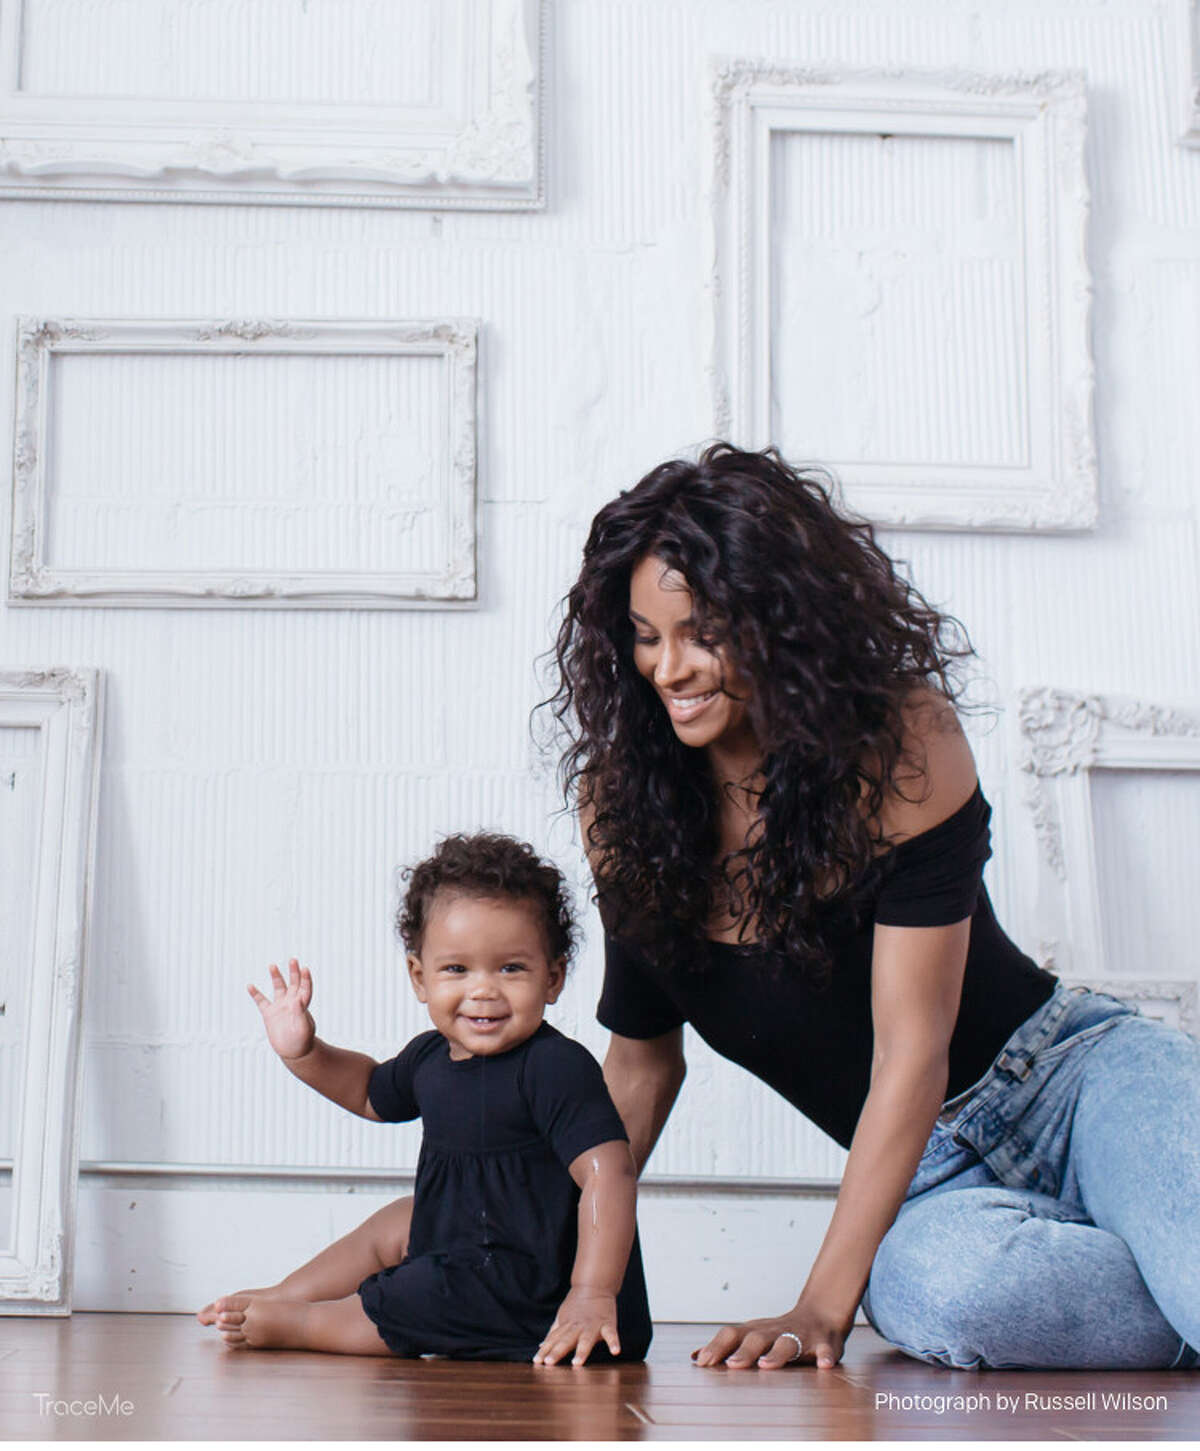 Ciara and Russell Wilson posted the first photos of Sienna Princess Wilson to TraceMe, the app Russell Wilson started. The post also included a letter from Ciara to Sienna, a video of the two, and an audio version of the letter.